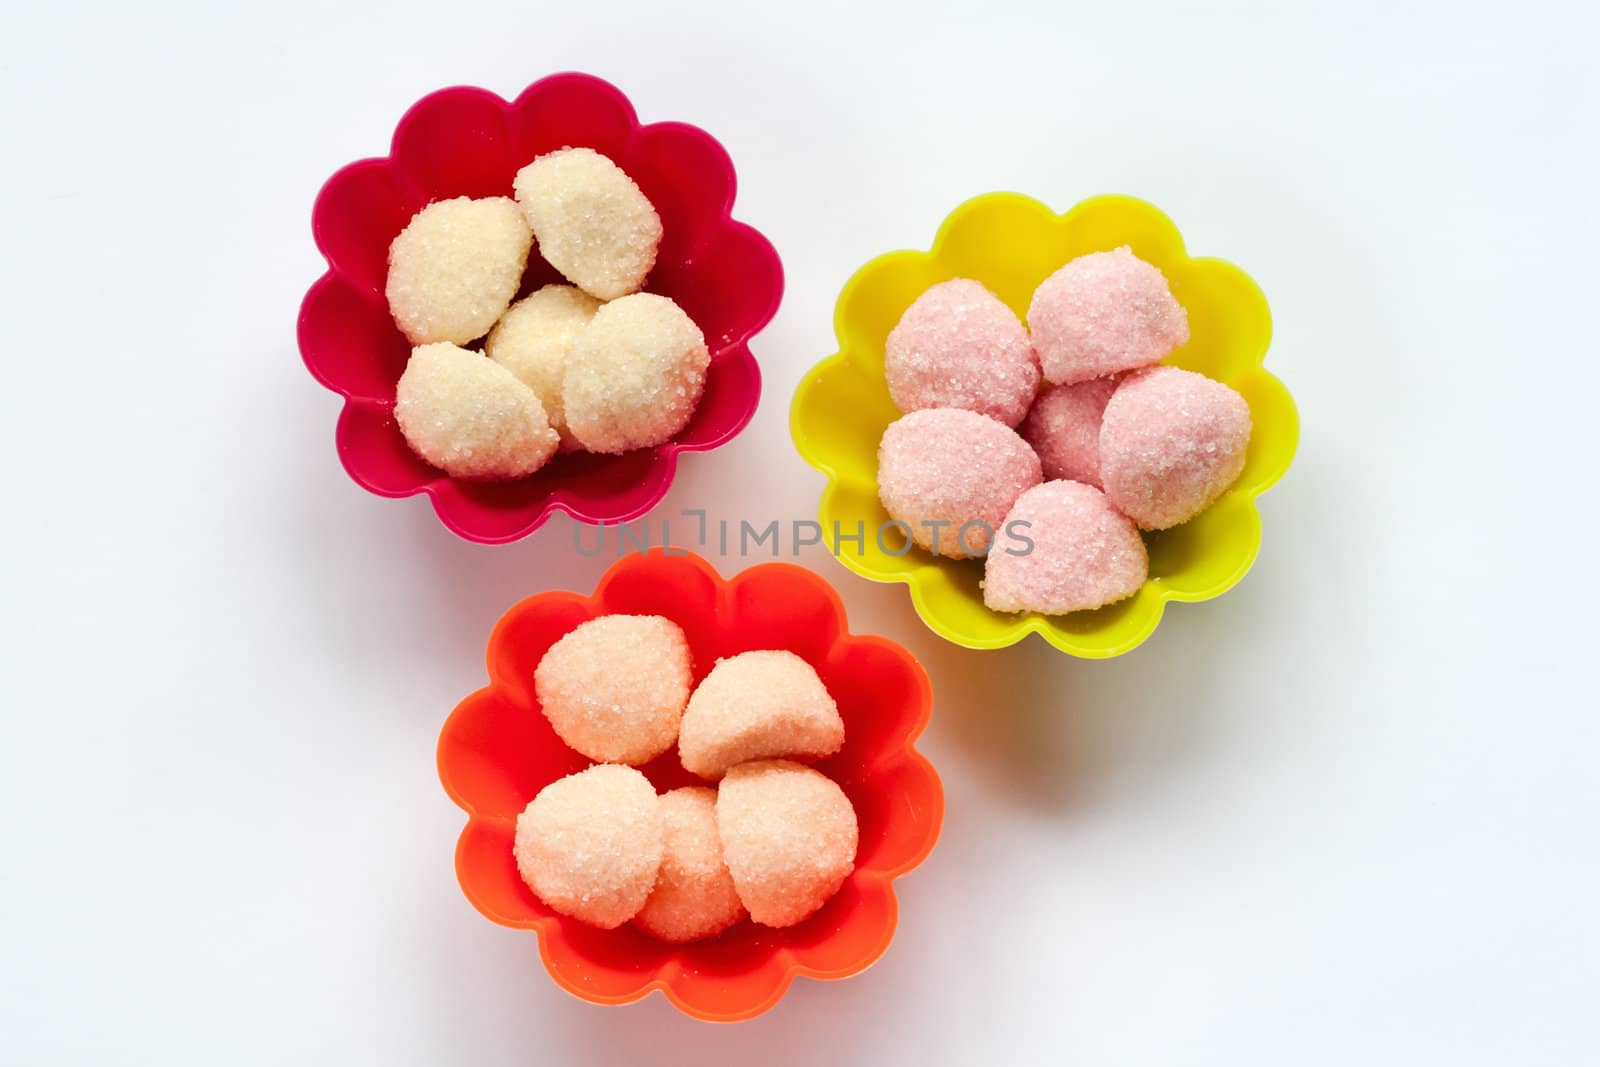 sweet jelly candies in cup cake cases on white